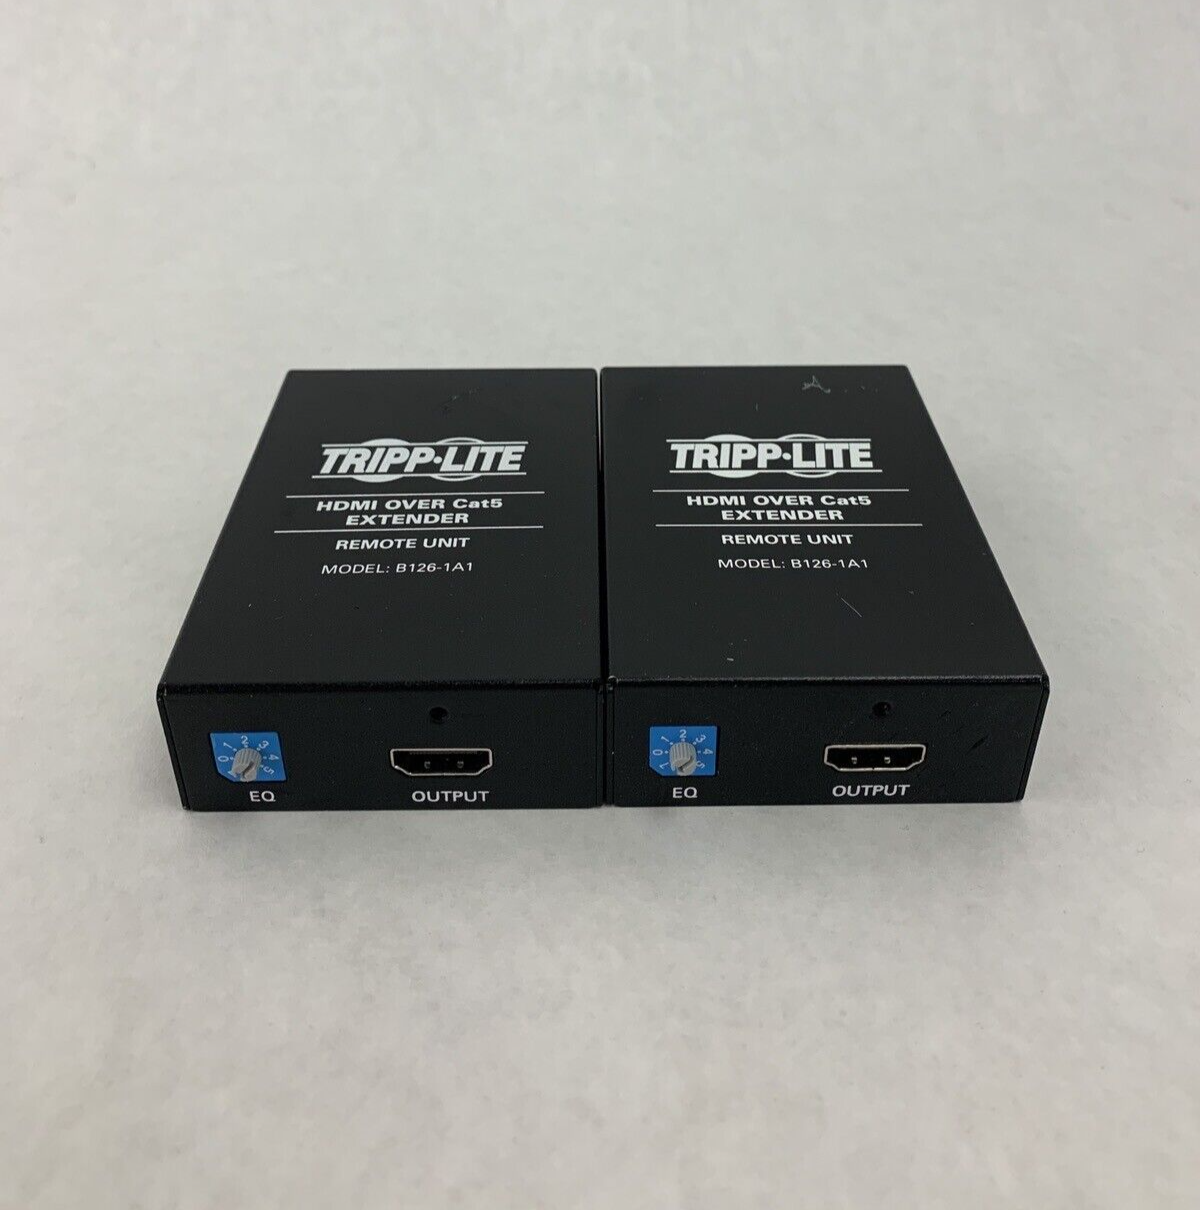 Lot of 2 Tripp-Lite HDMI Over Cat 5 Extender Kit B126-1A1 Untested